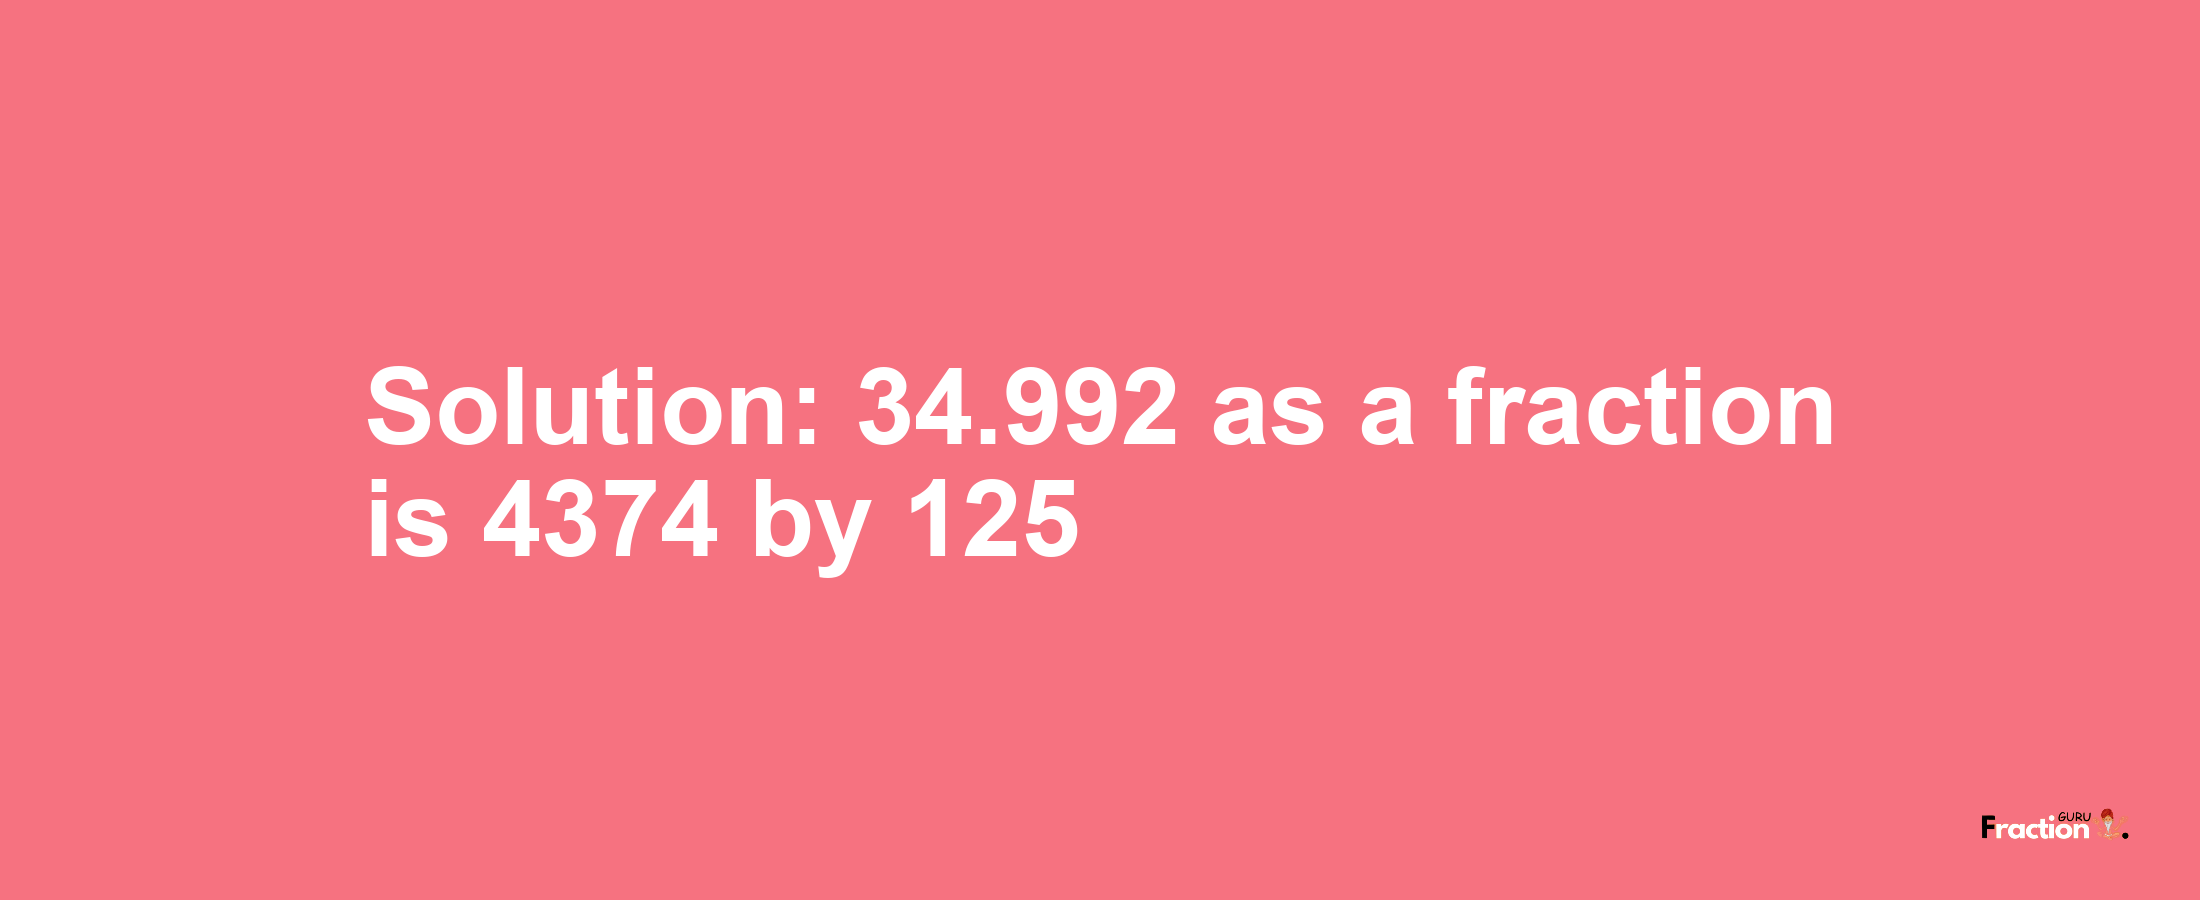 Solution:34.992 as a fraction is 4374/125